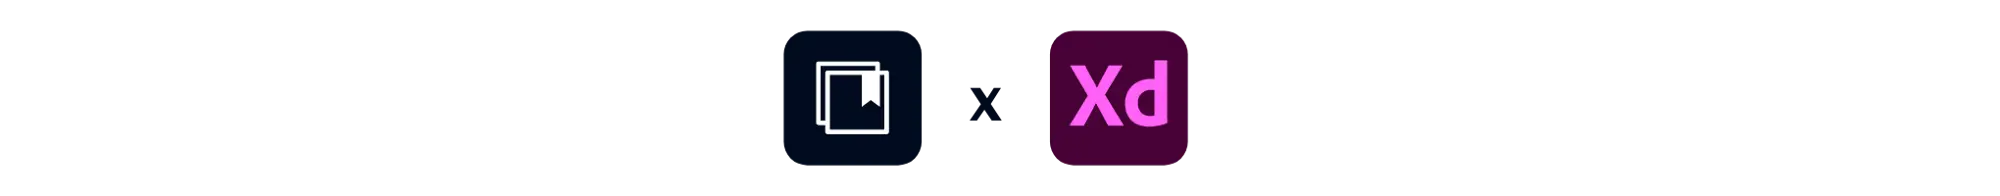 Creative Cloud Libraries and Adobe XD logos shown side-by-side.